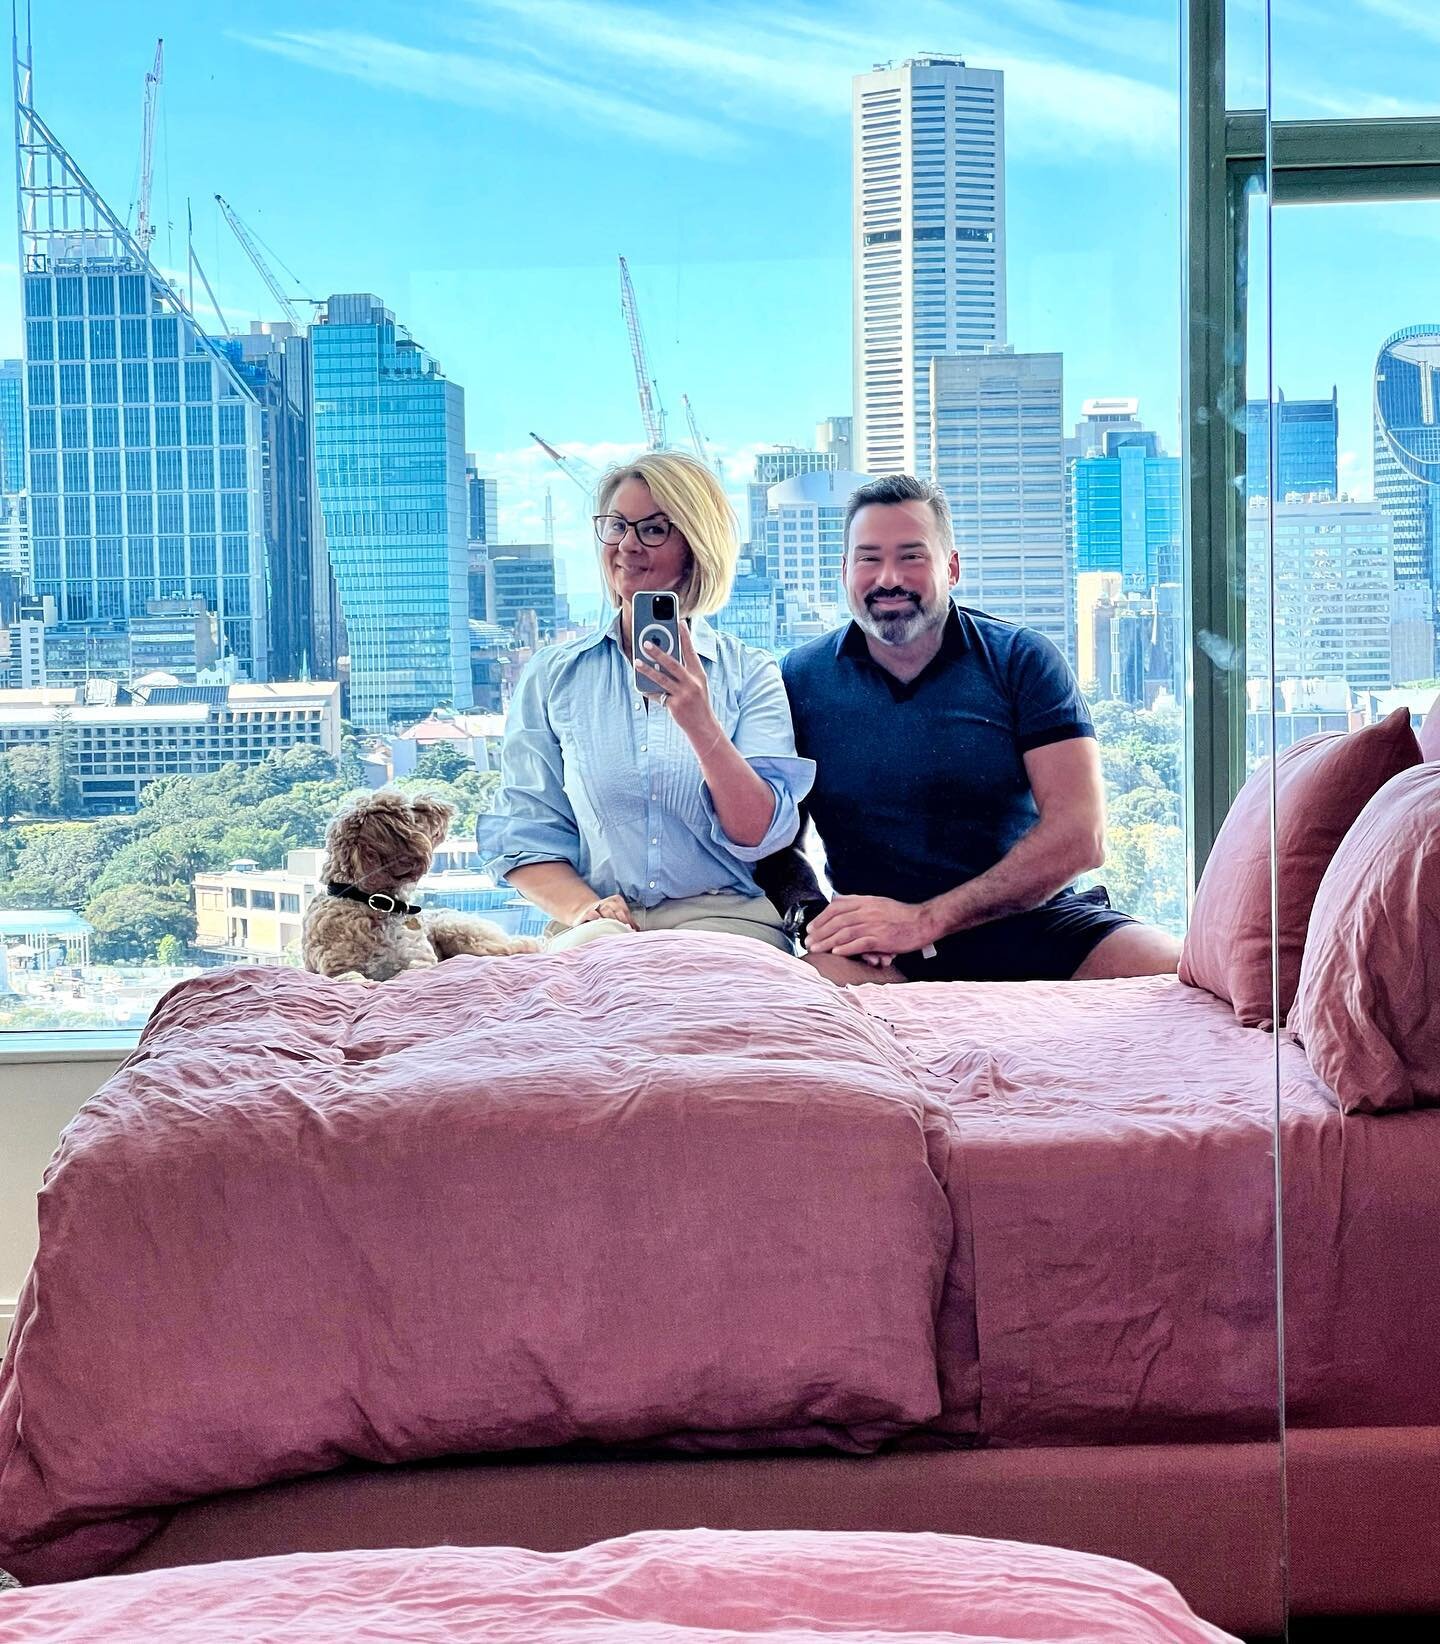 There is nothing I love more than a room with a view&hellip;. @brucekeebaugh and I have been busily making up ikea draws, measuring up side tables ,making beds and a whole lot more&hellip; 
We really are loving it here in Sydney and absolutely love t